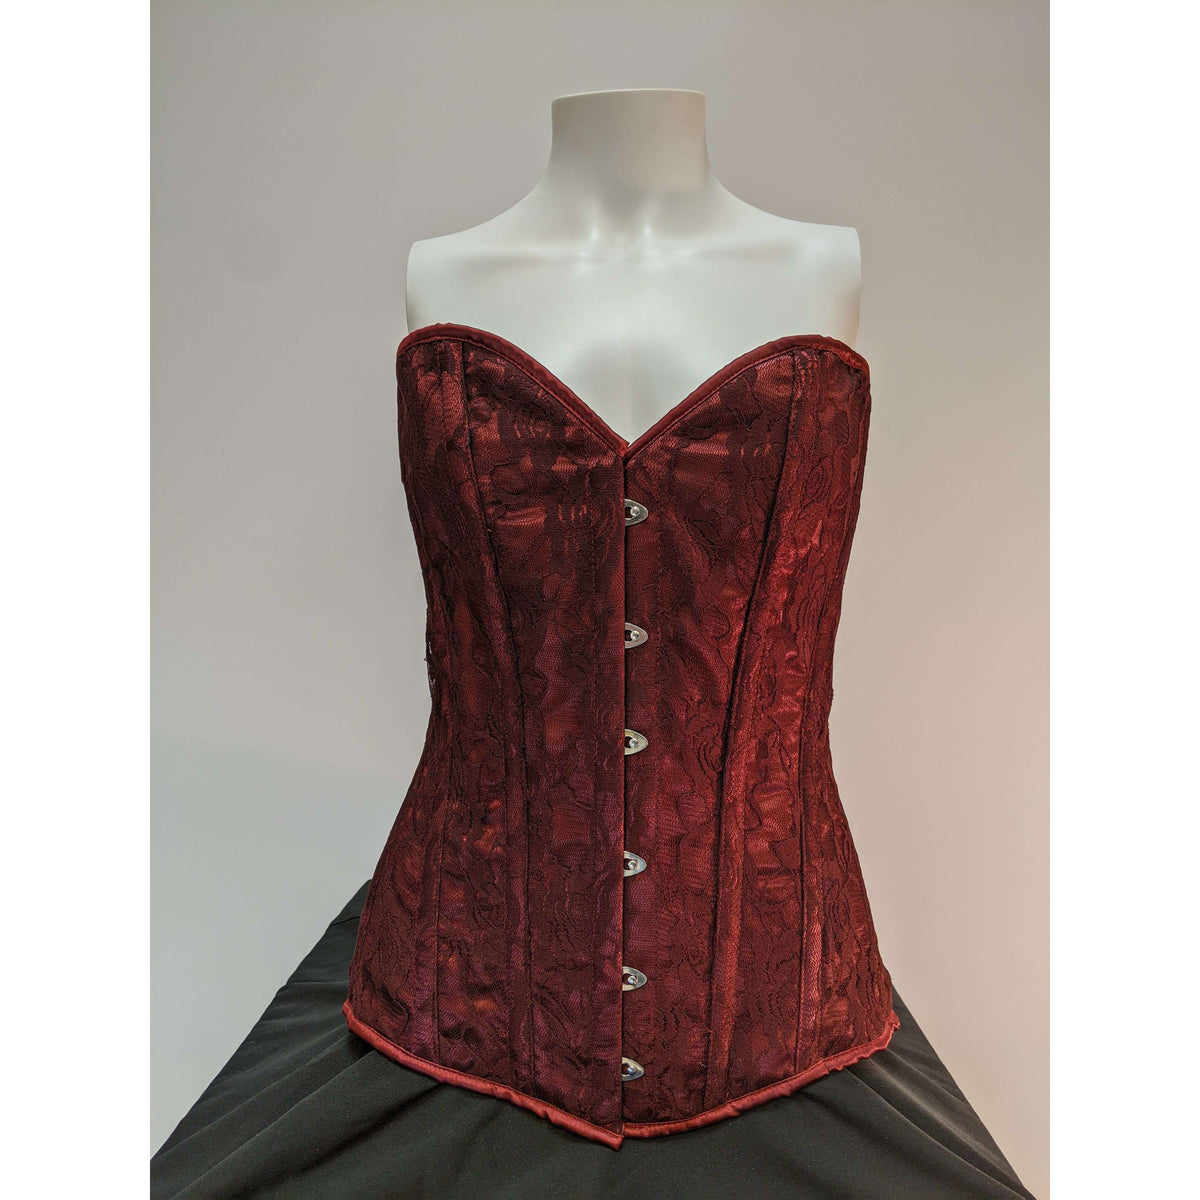 Top Drawer Red Wine Steel Boned Lace Corset